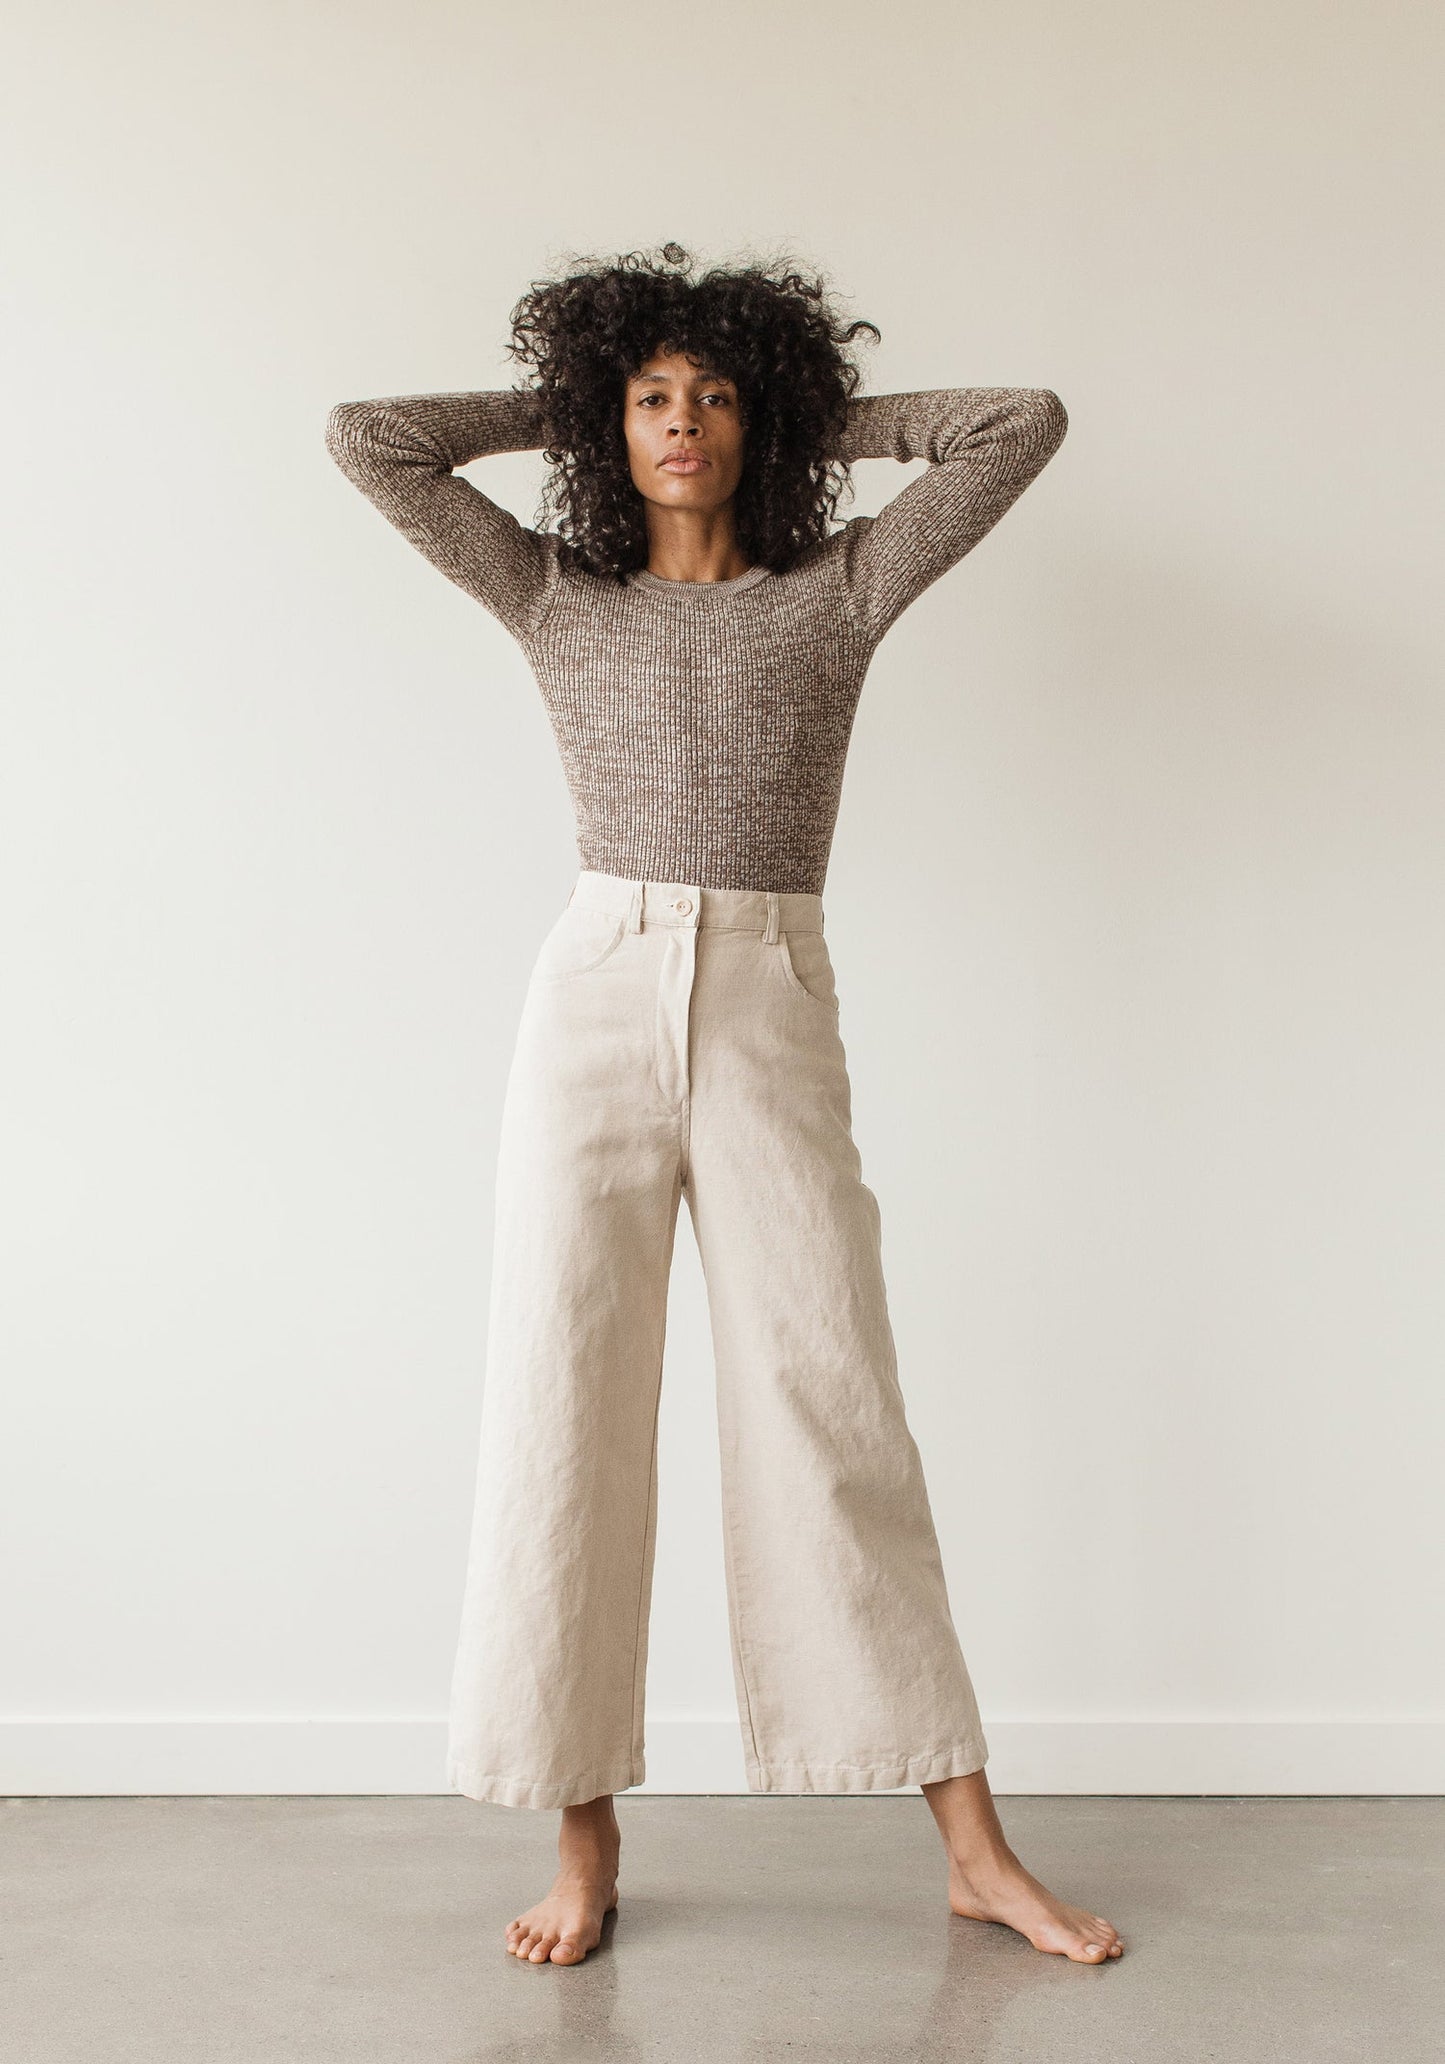 The new easy, everyday, go with anything trouser. Designed with a flattering high rise that is fitted through the hips and opens to a comfortable wide leg opening. Cut from an OEKO Tex Certified linen/cotton blend canvas twill, equal parts structure and comfort. First Rite sold at Thread Spun.